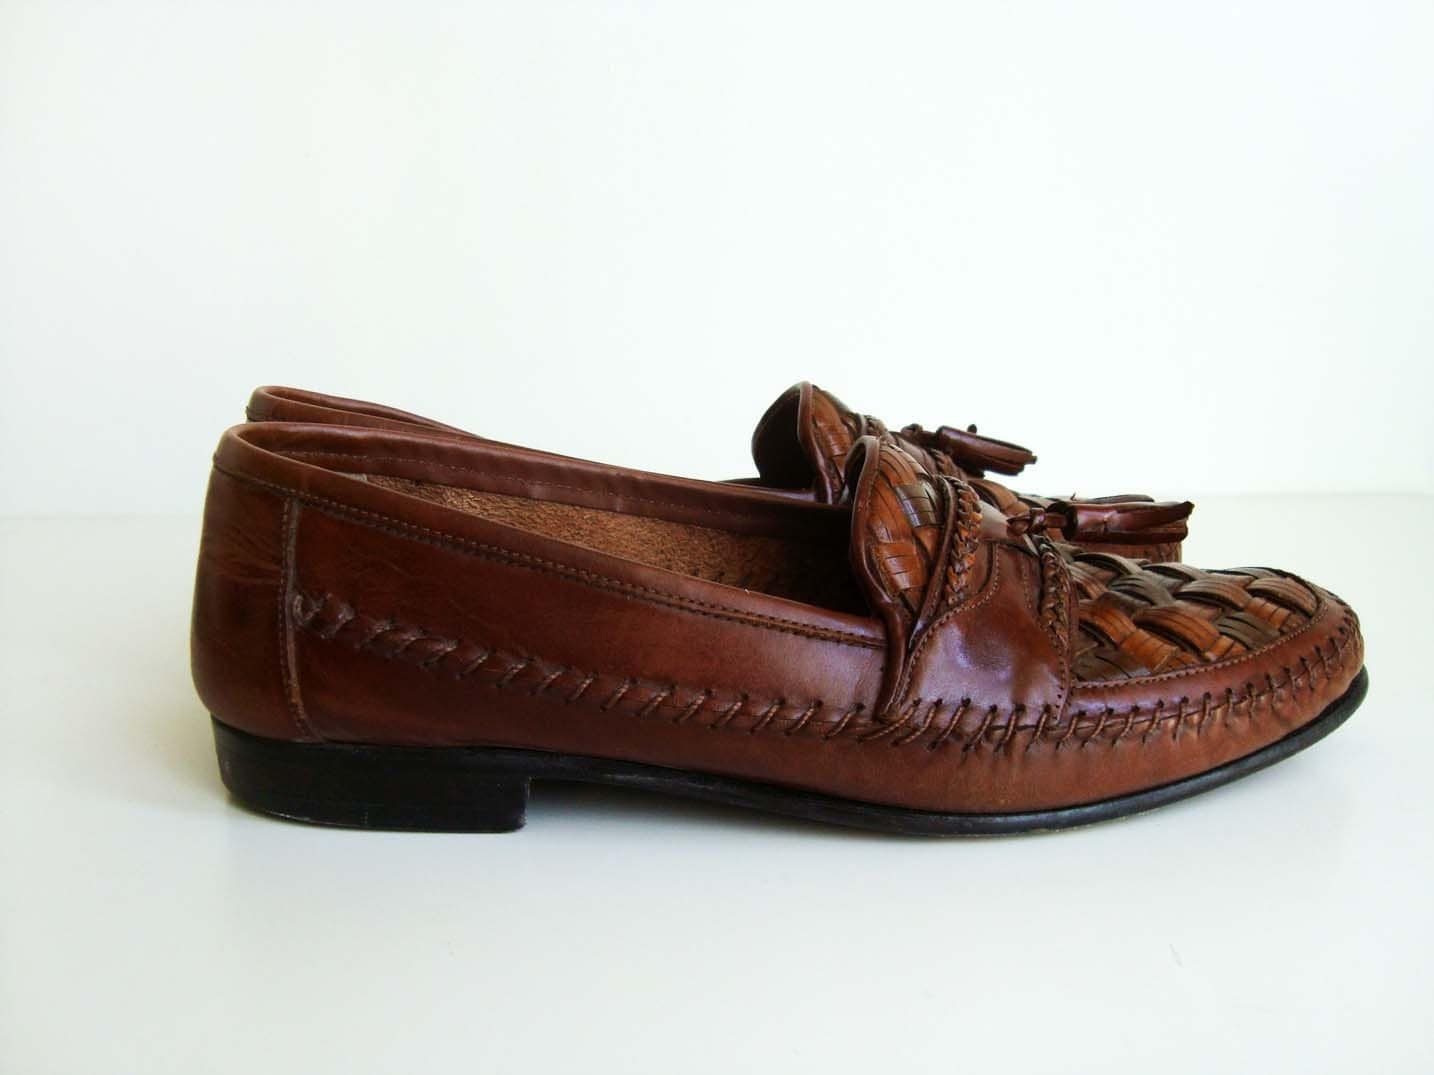 Giorgio Brutini Le Glove Woven Leather Loafers with Tassels